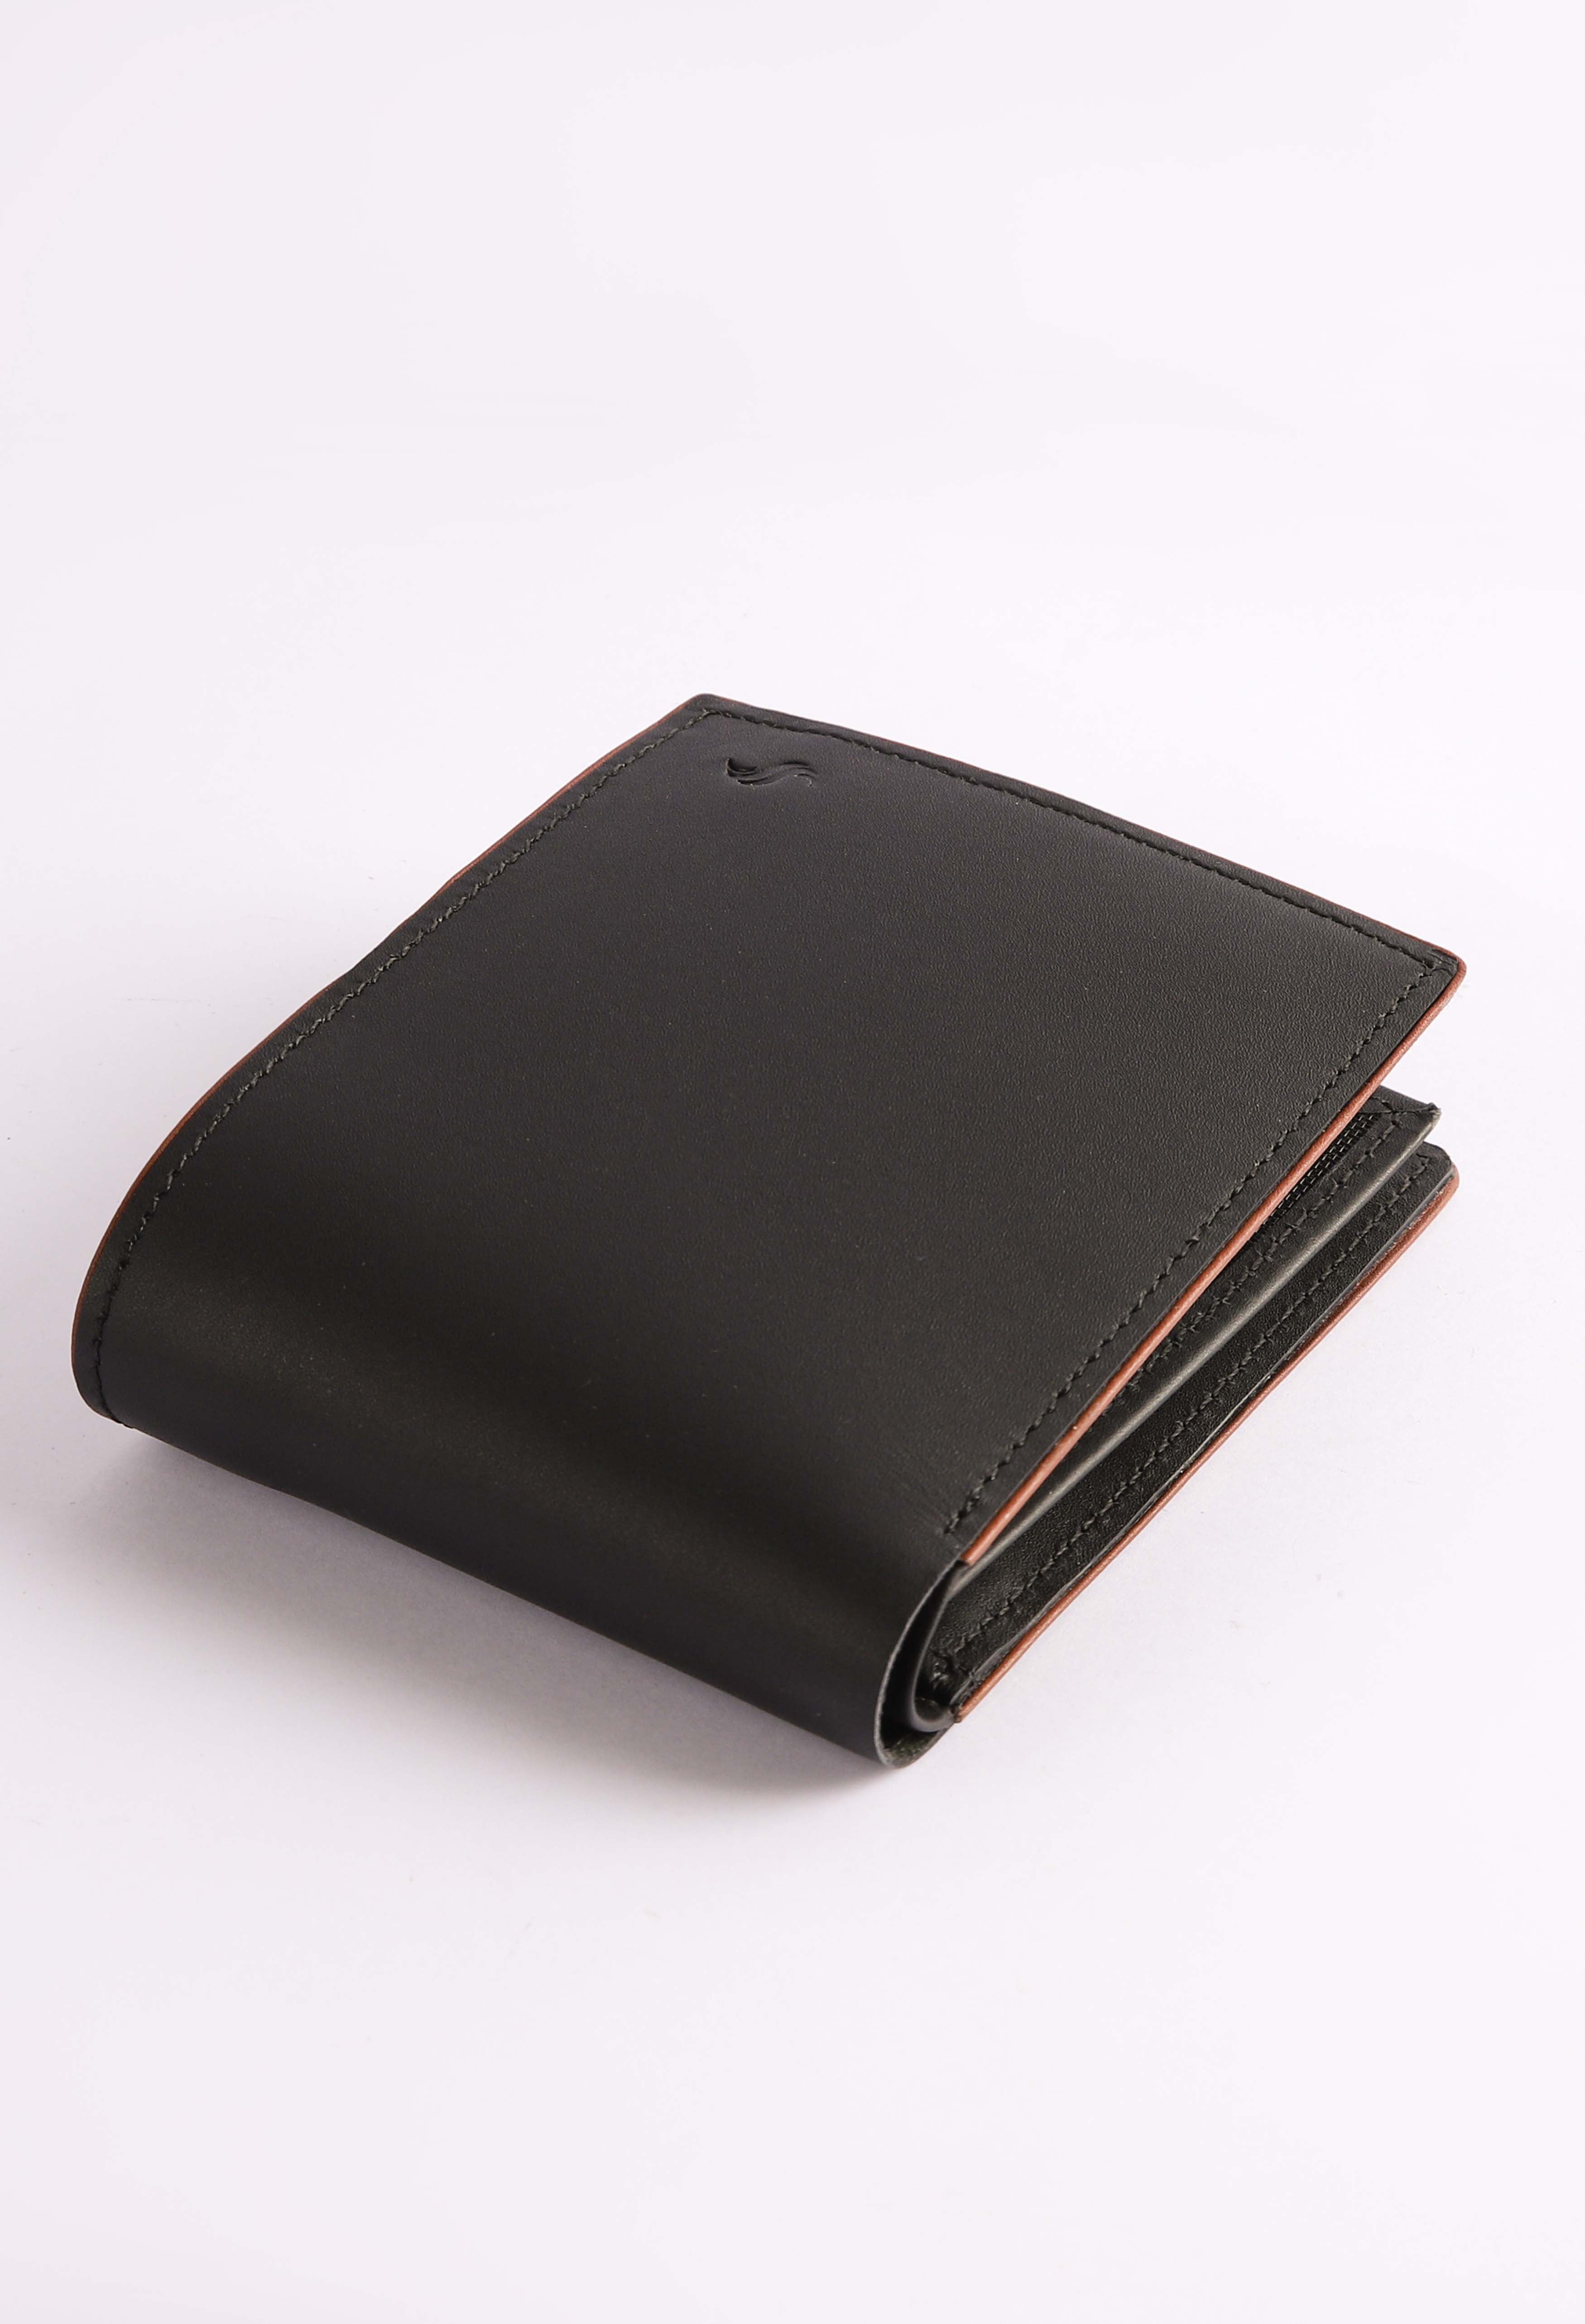 Onyx Black Pure Leather Wallet (WL-000015)